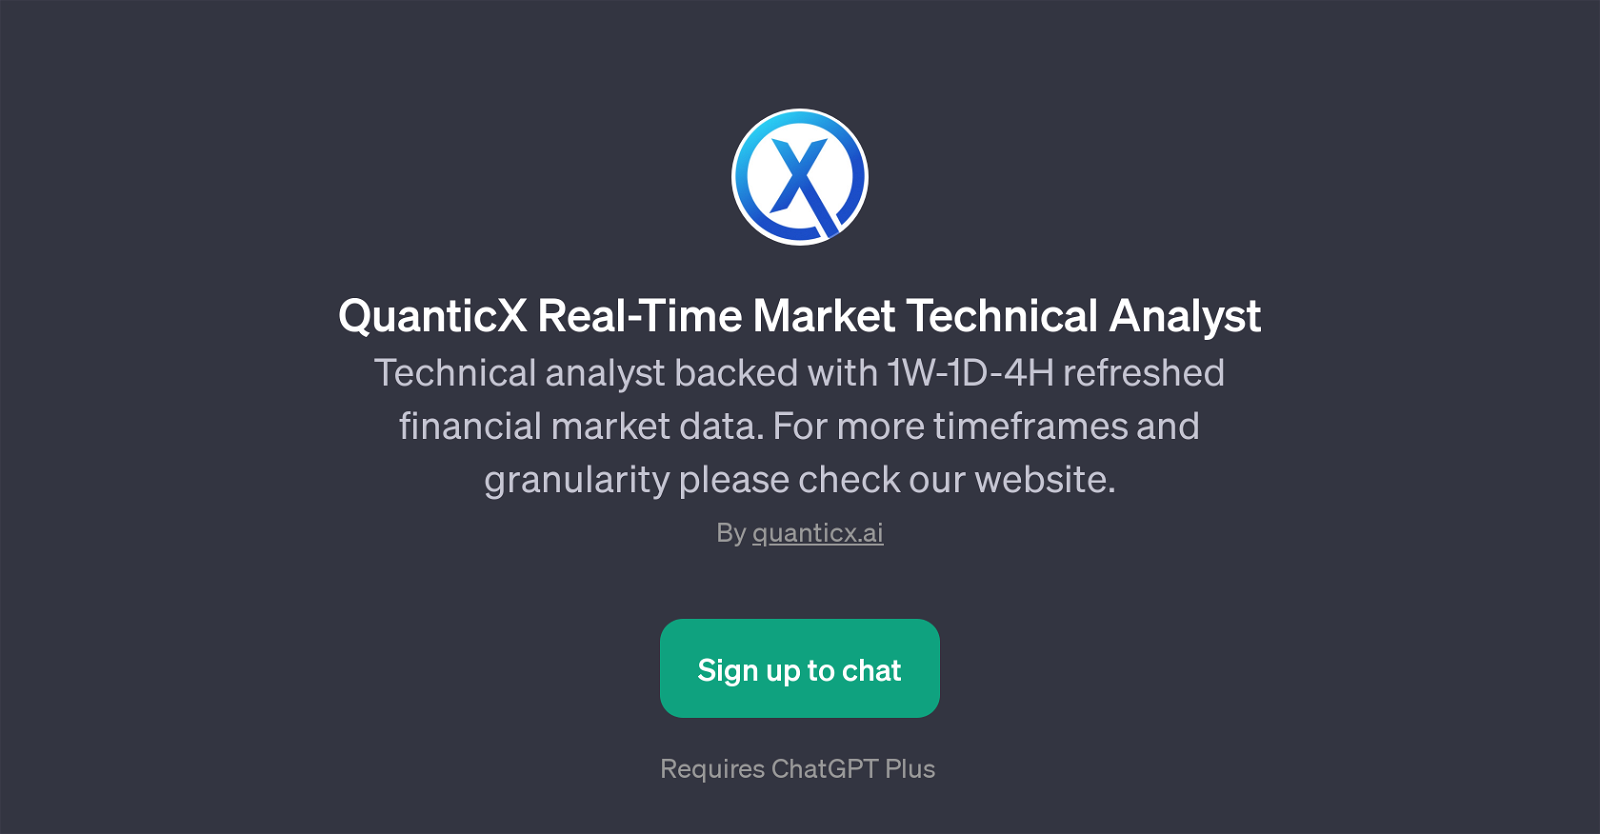 QuanticX Real-Time Market Technical Analyst website